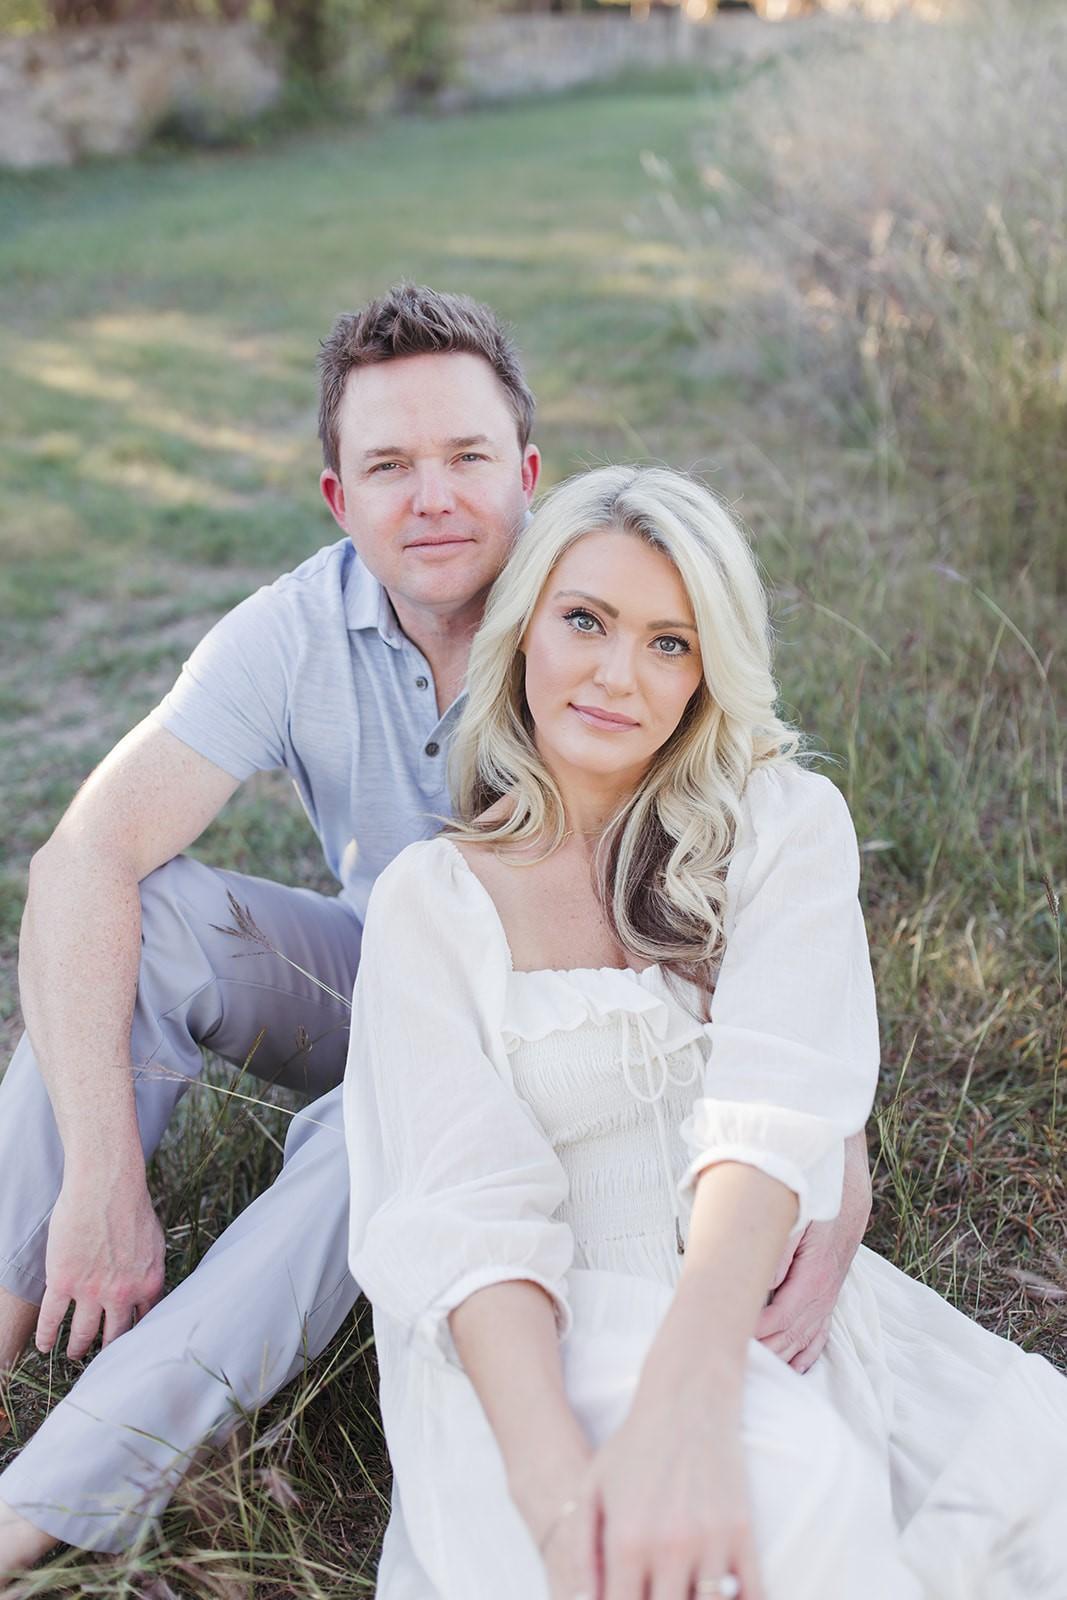 The Wedding Website of Amanda Sims and Mike Ketter